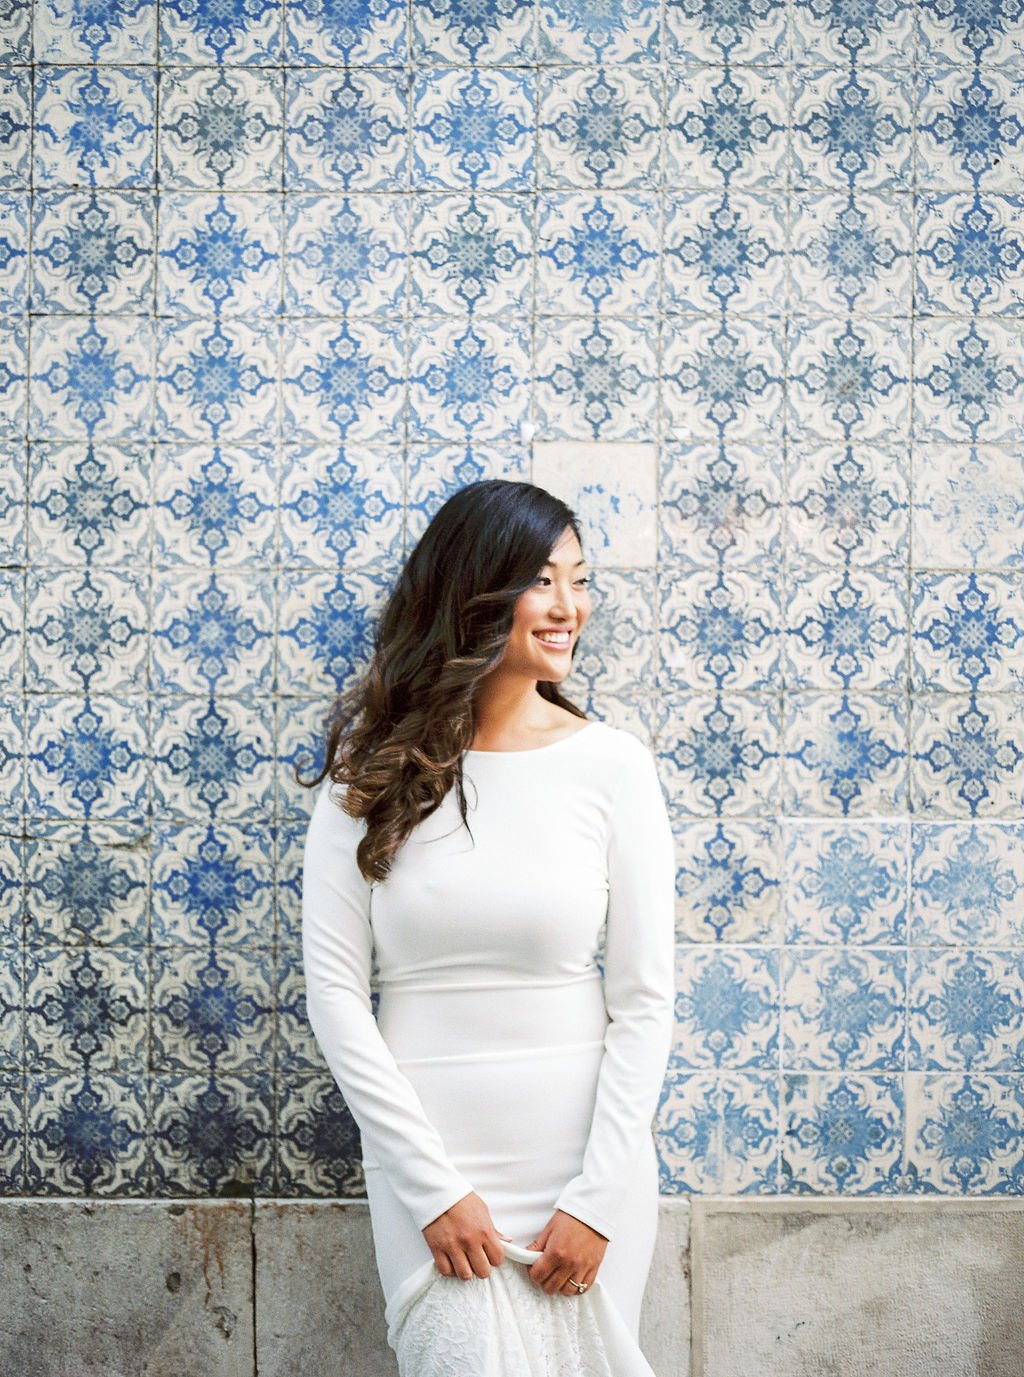 Beautiful bride at her engagement shoot standing in front of blue and white tiles